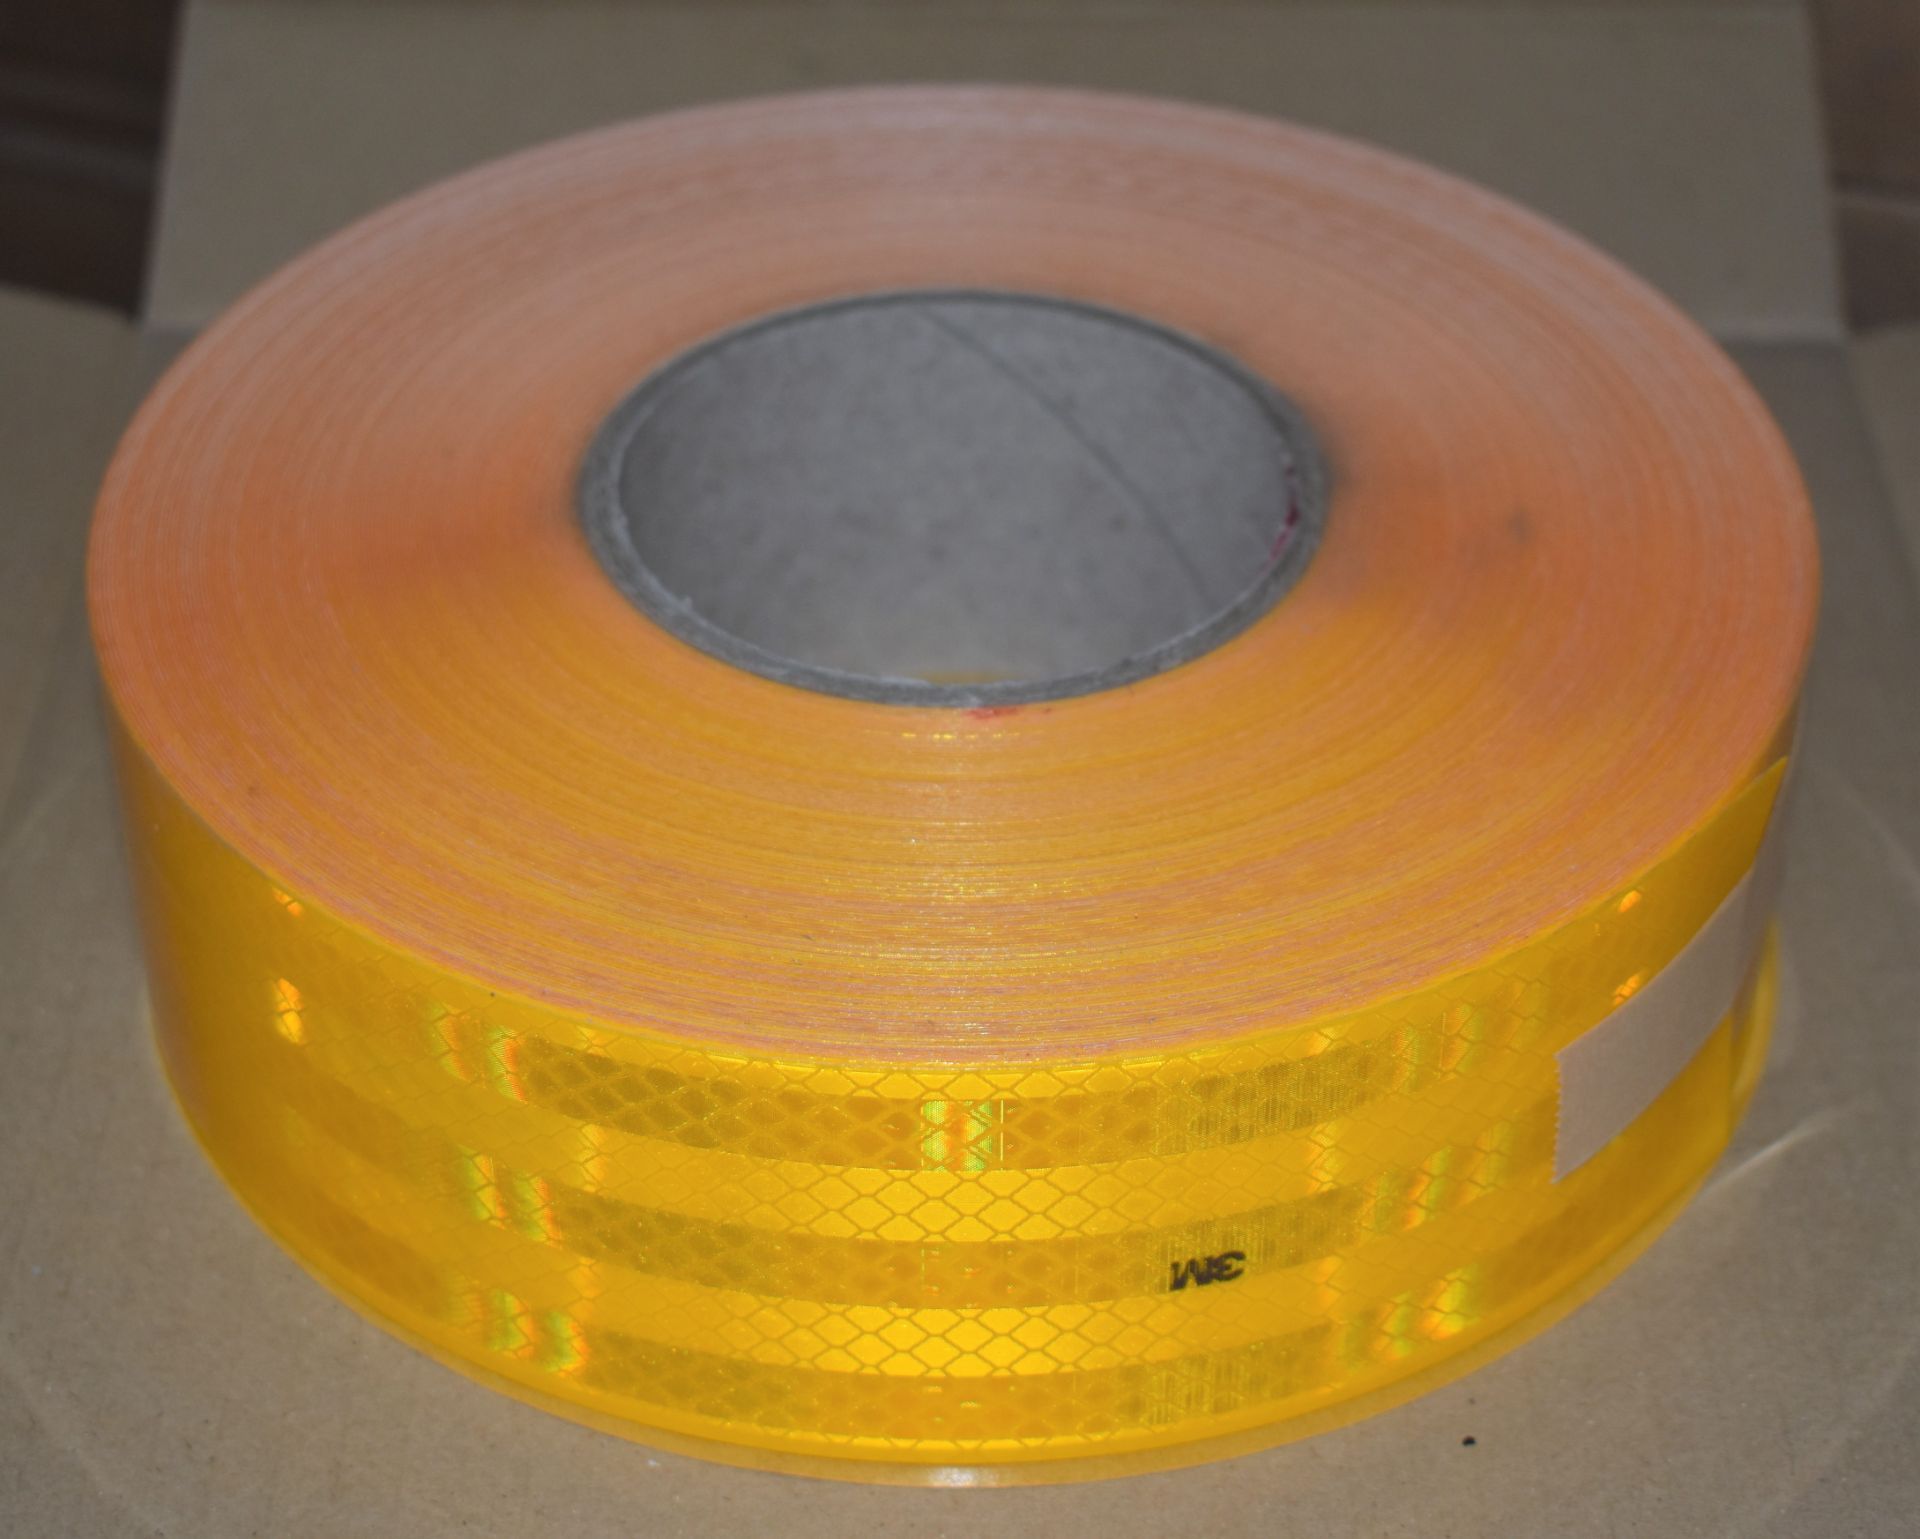 1 x Roll of 3M Conspicuity Tape Reflective Sheeting - Size 55mm x 50m - Diamond Grade - Colour - Image 4 of 5